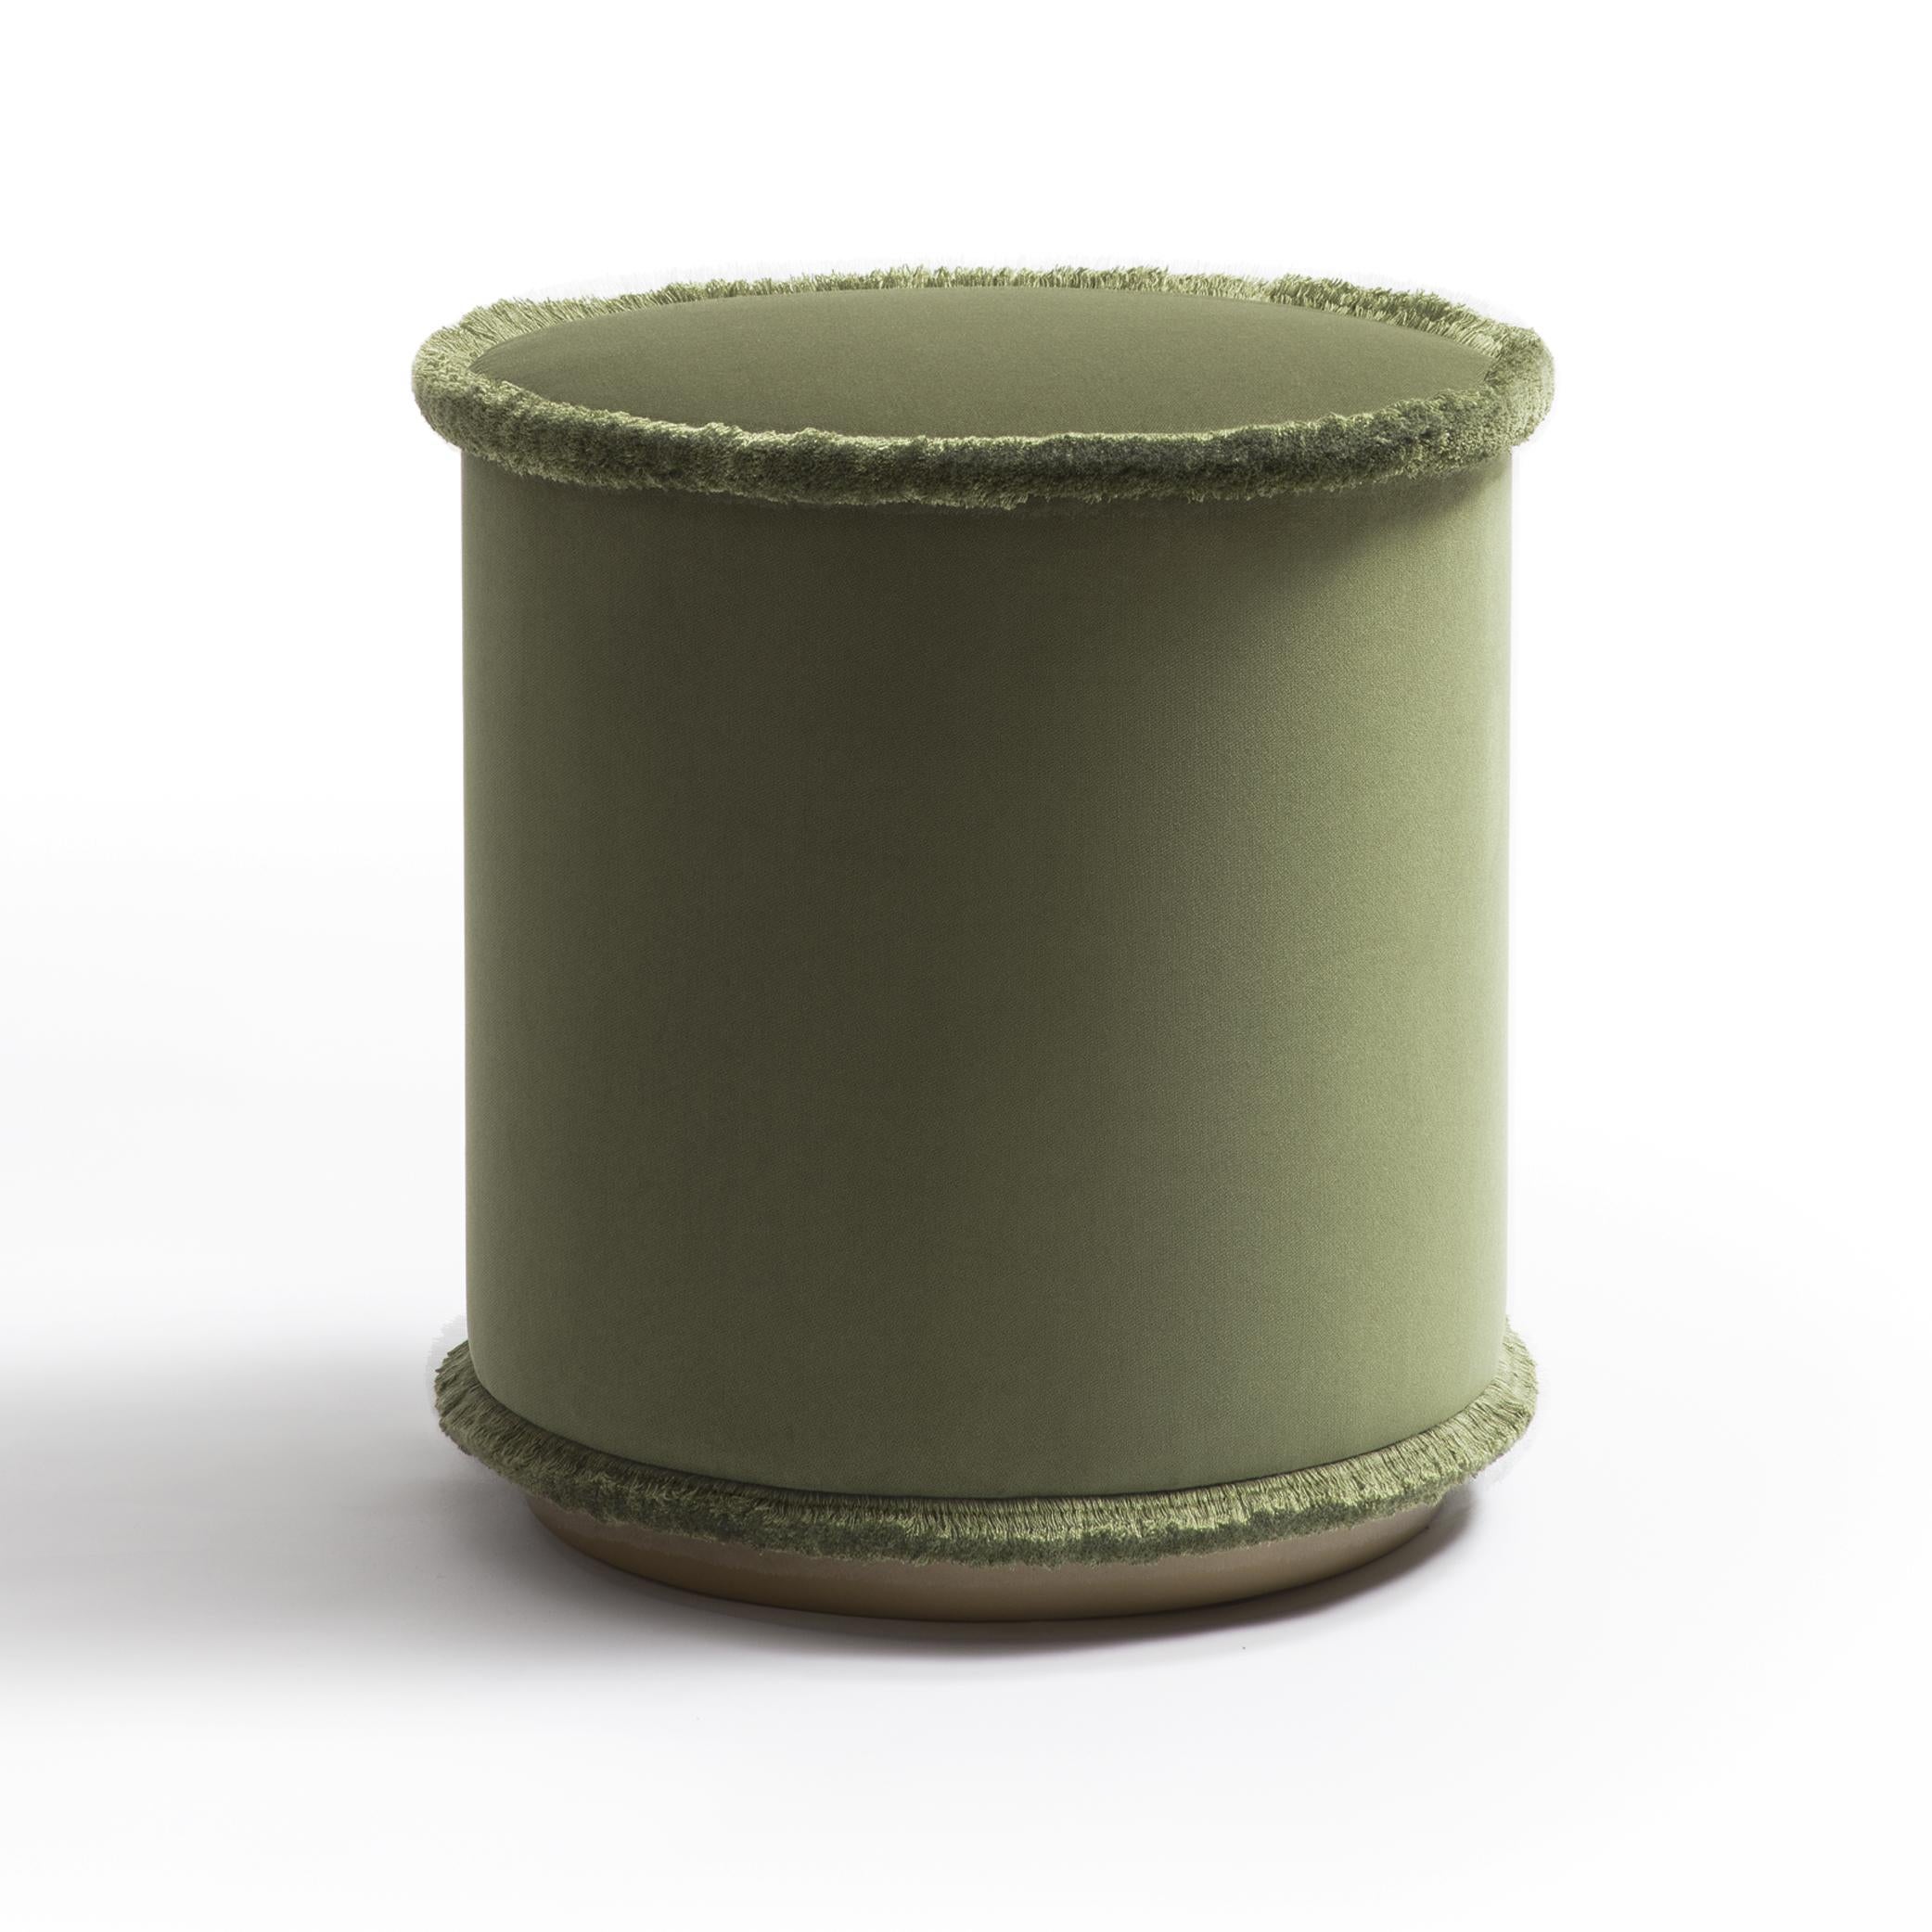 IL Pouf  Tone on Tone is the pouf collection in the hues of green, brick, mustard and beige. These refined poufs embellish any environment with their simple and compact design. Imbibing any space with a natural appeal, IL Pouf is upholstered in soft